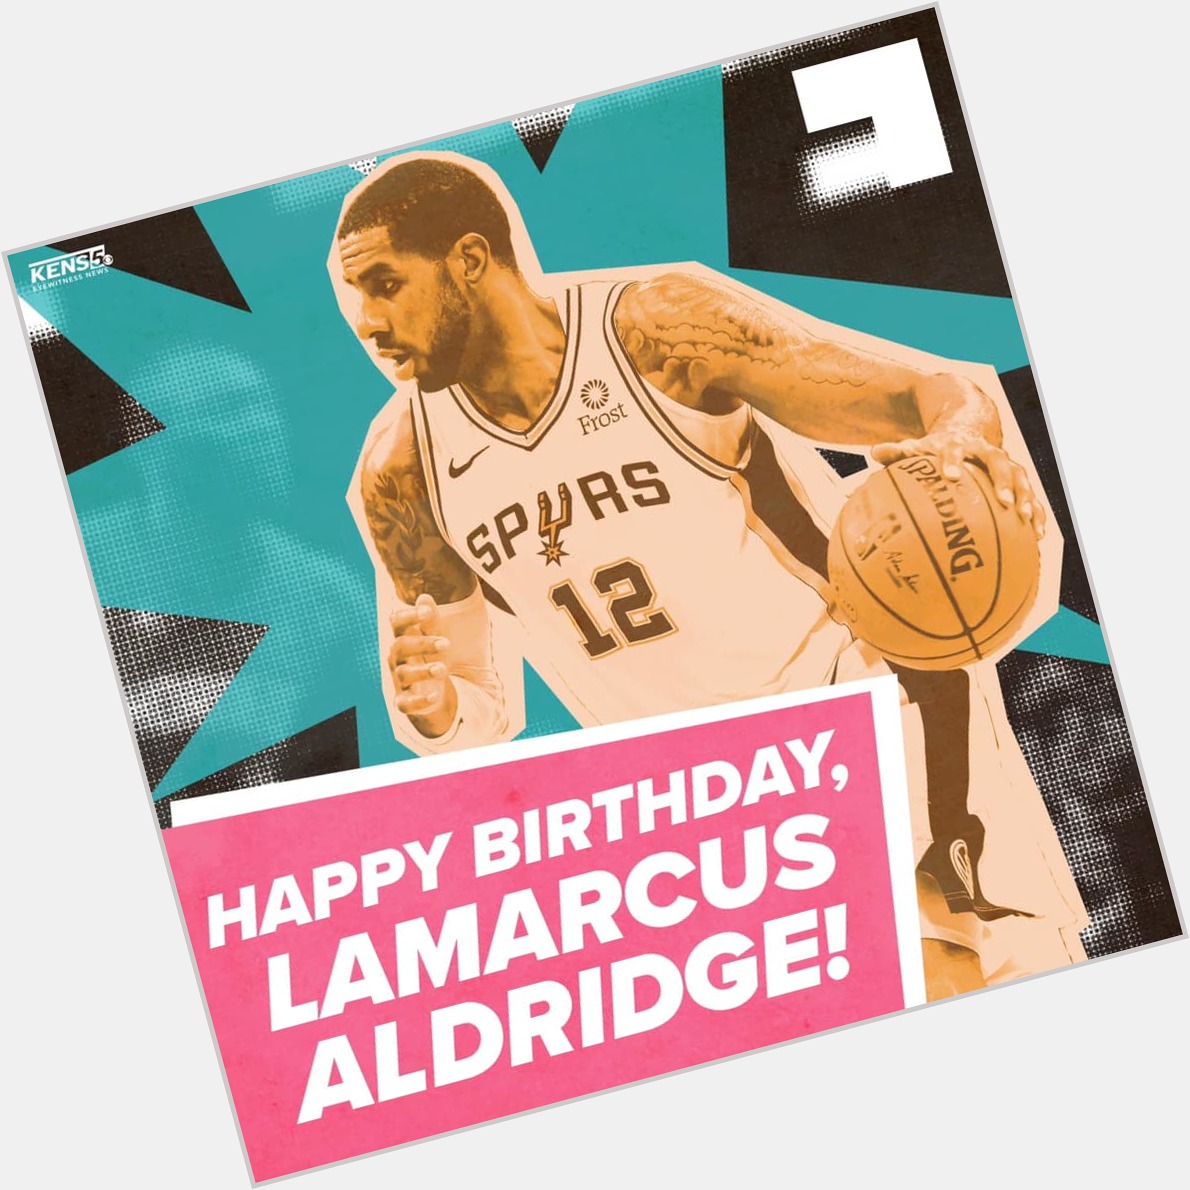 Join us in wishing a Happy Birthday to LaMarcus Aldridge! The All-Star power forward turns 34 today! 